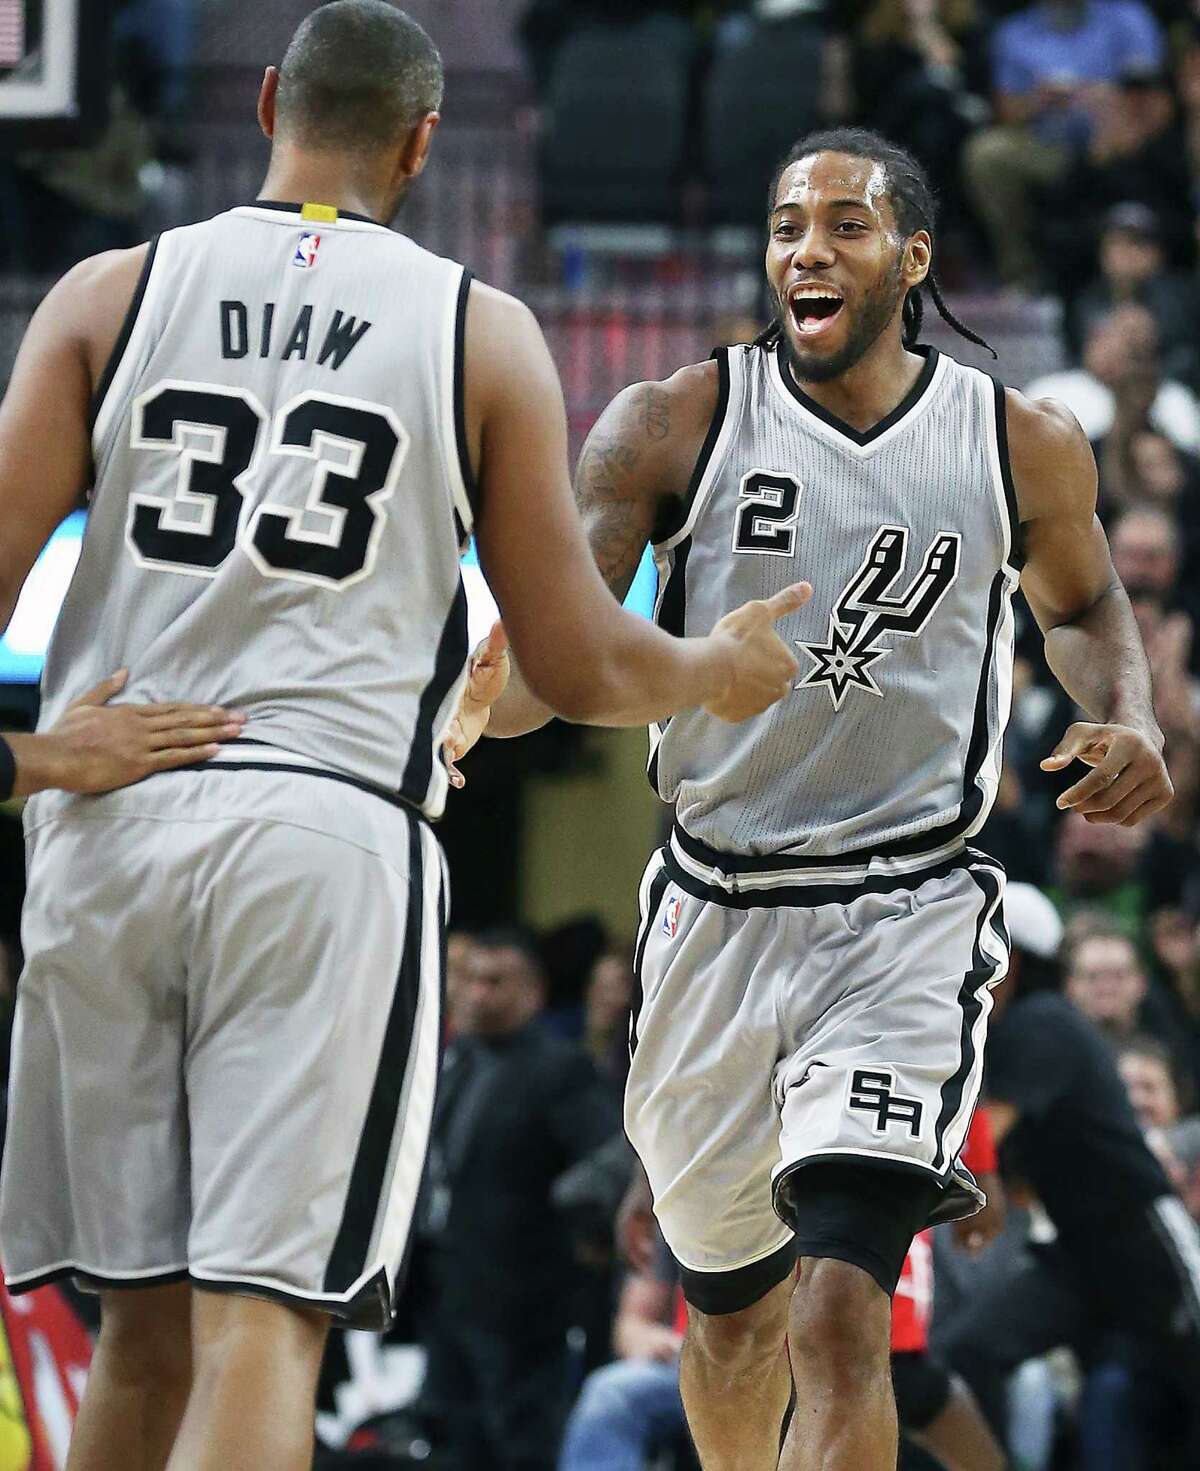 Kawhi Leonard laughs as he is congratulated by Boris Diaw on a three pointer in the second half as the Spurs host the Rockets at the AT&T Center on January 2, 2016.